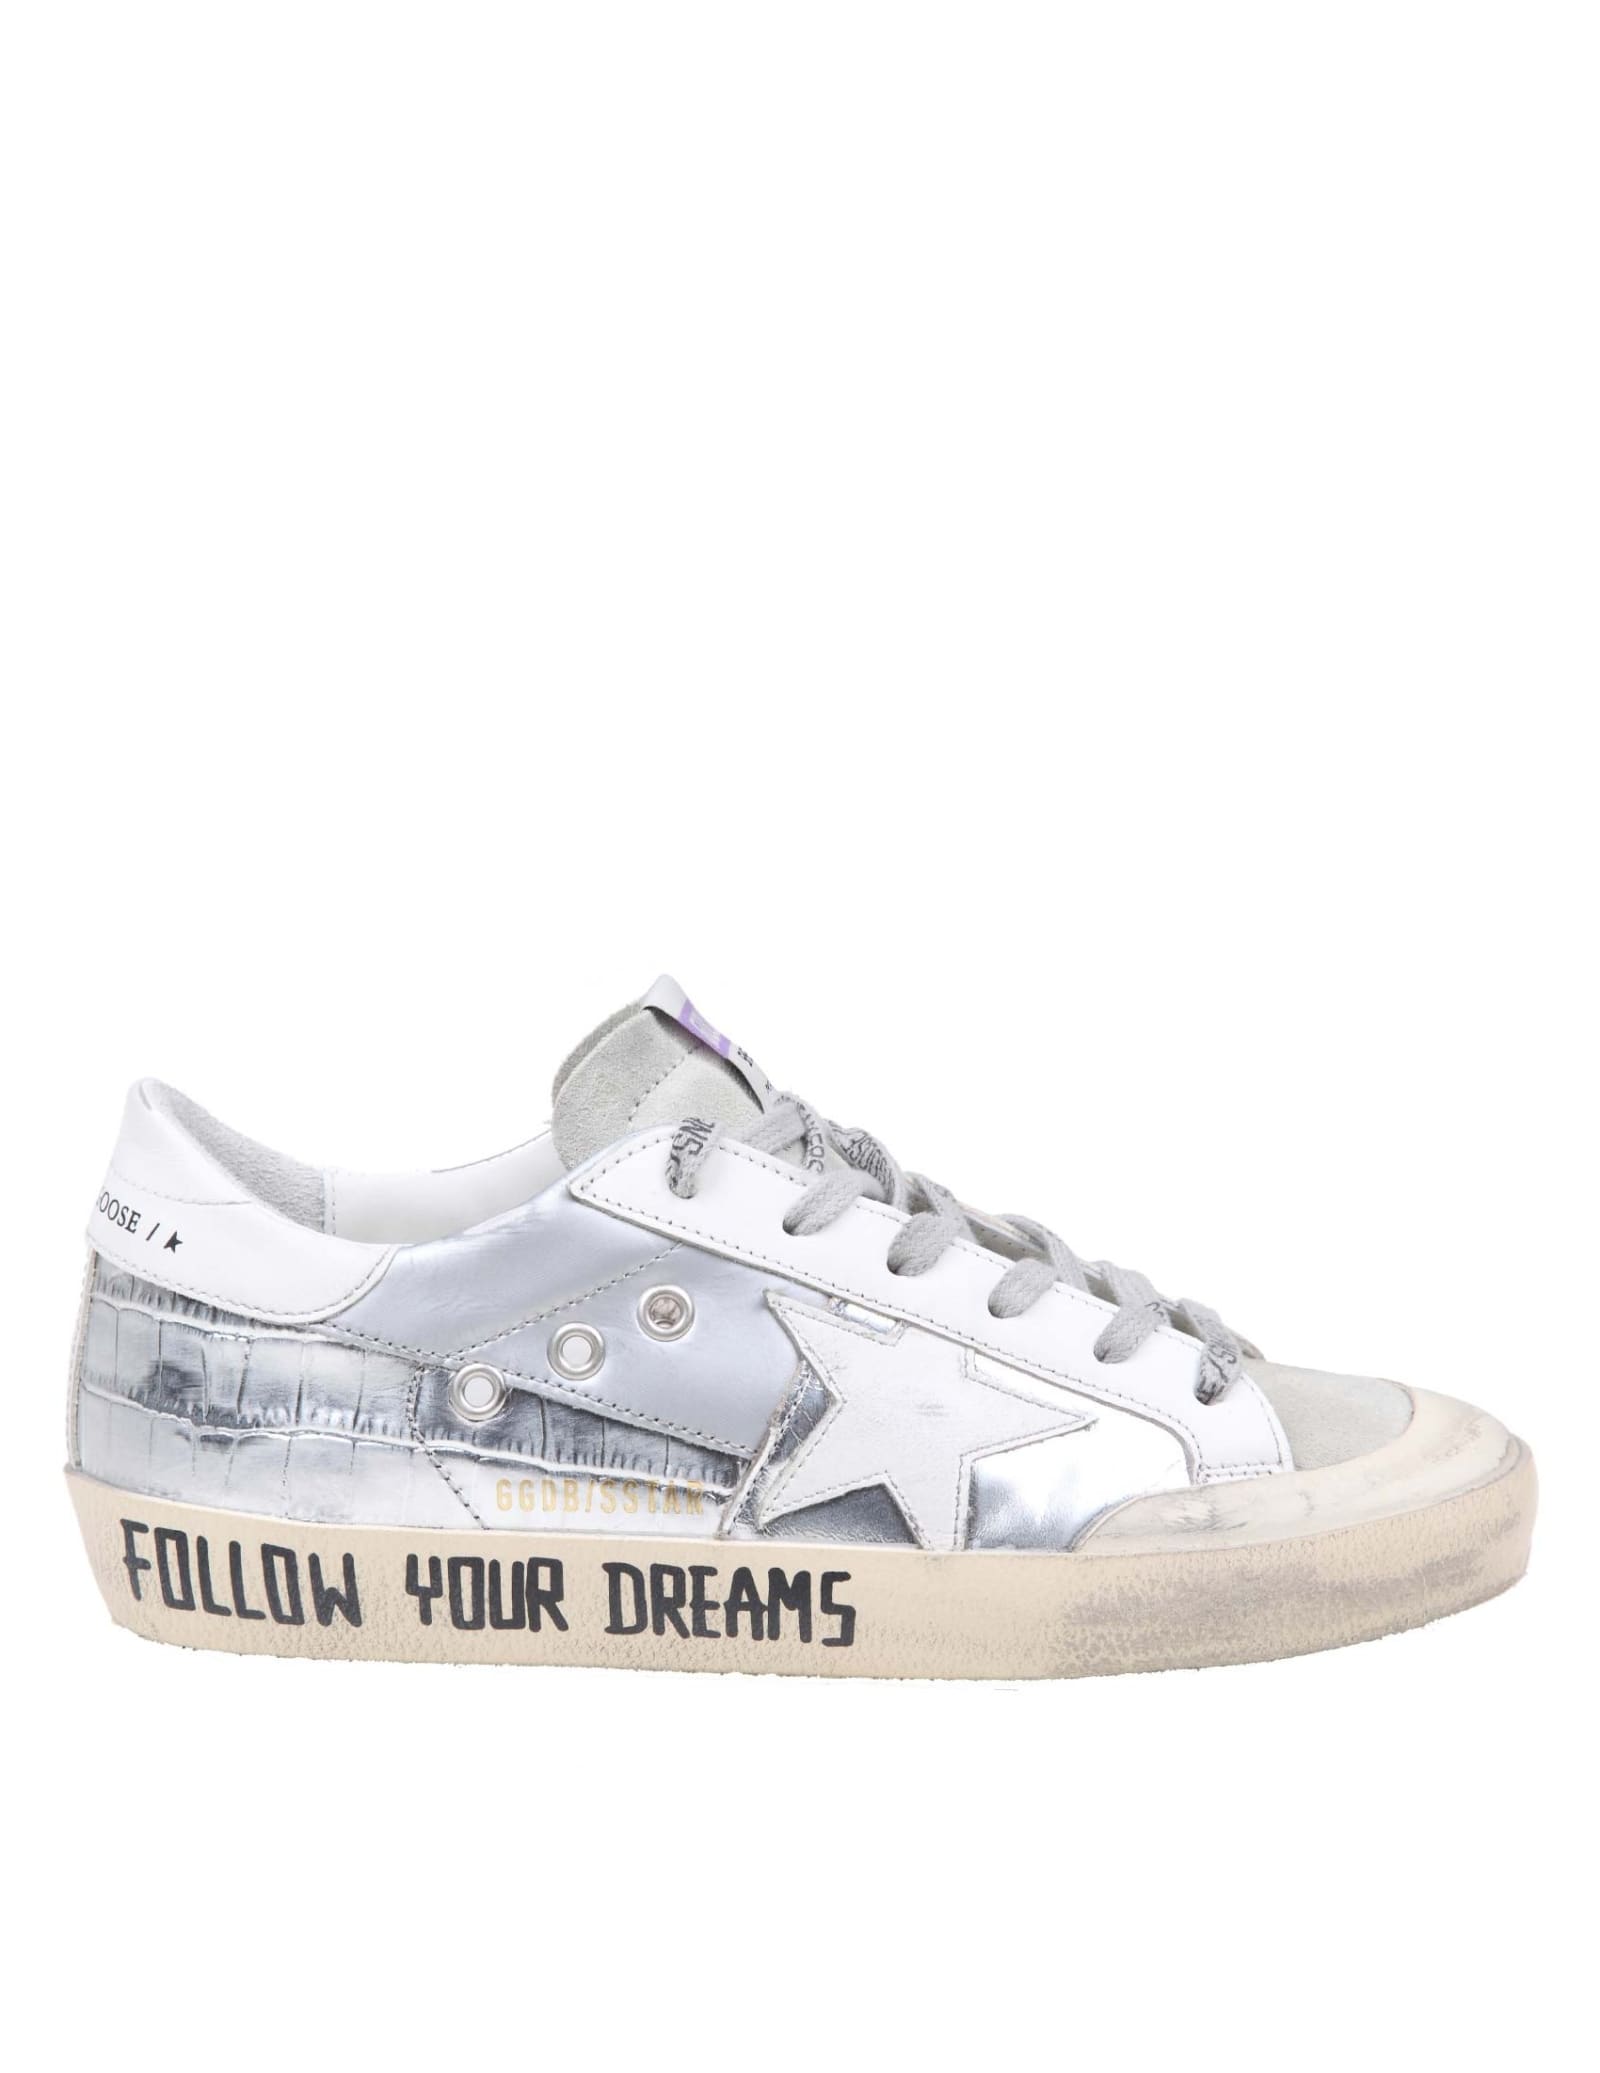 Golden Goose Superstar Sneakers In Laminated Leather